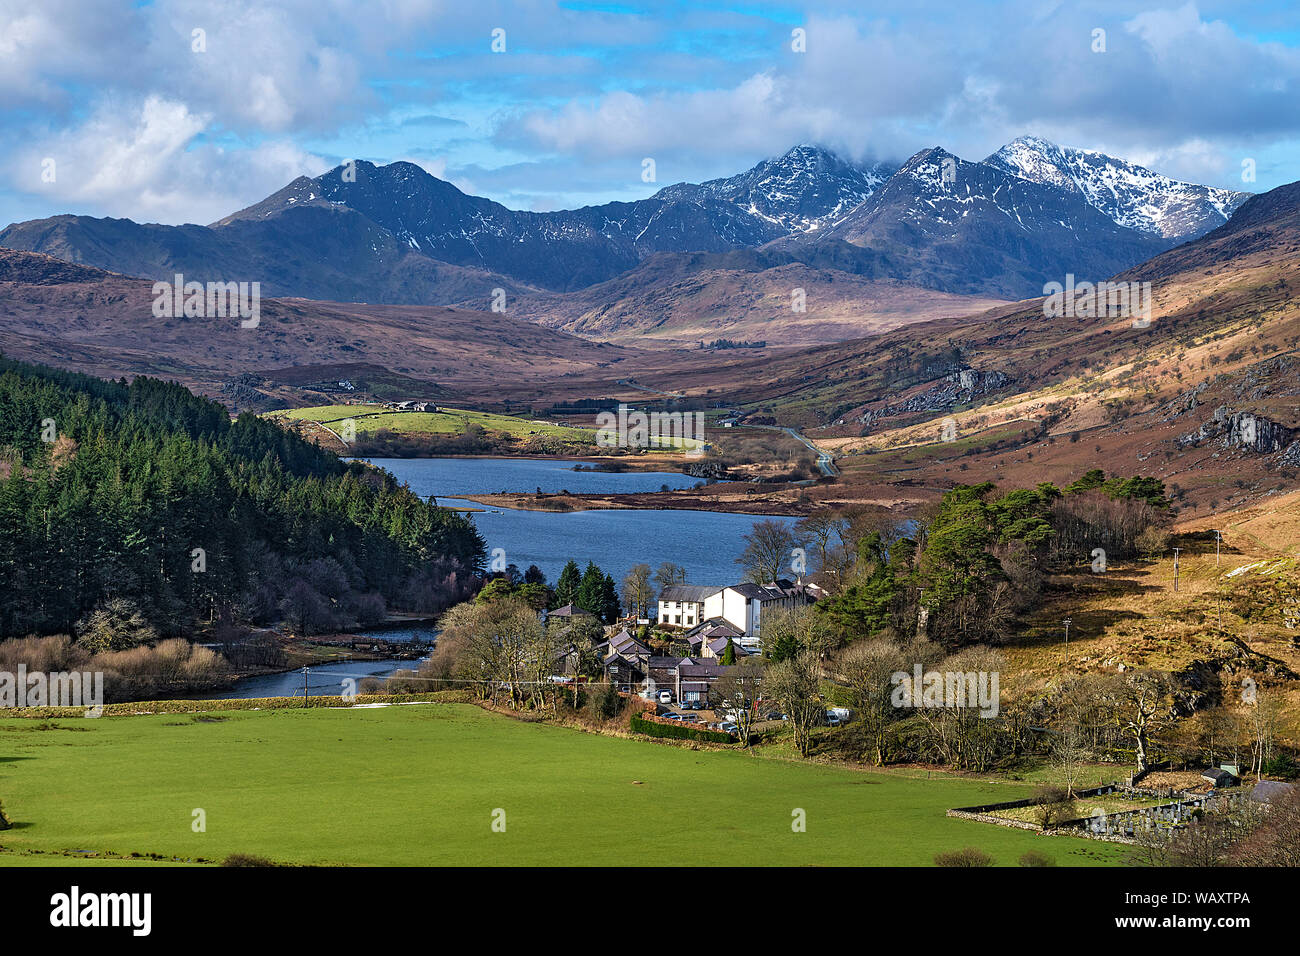 Plas y Brenin National Mountain Sports Centre by Llynnau Mymbyr with Snowdon Mountain Range in background Snowdonia National Park North Wales UK March Stock Photo